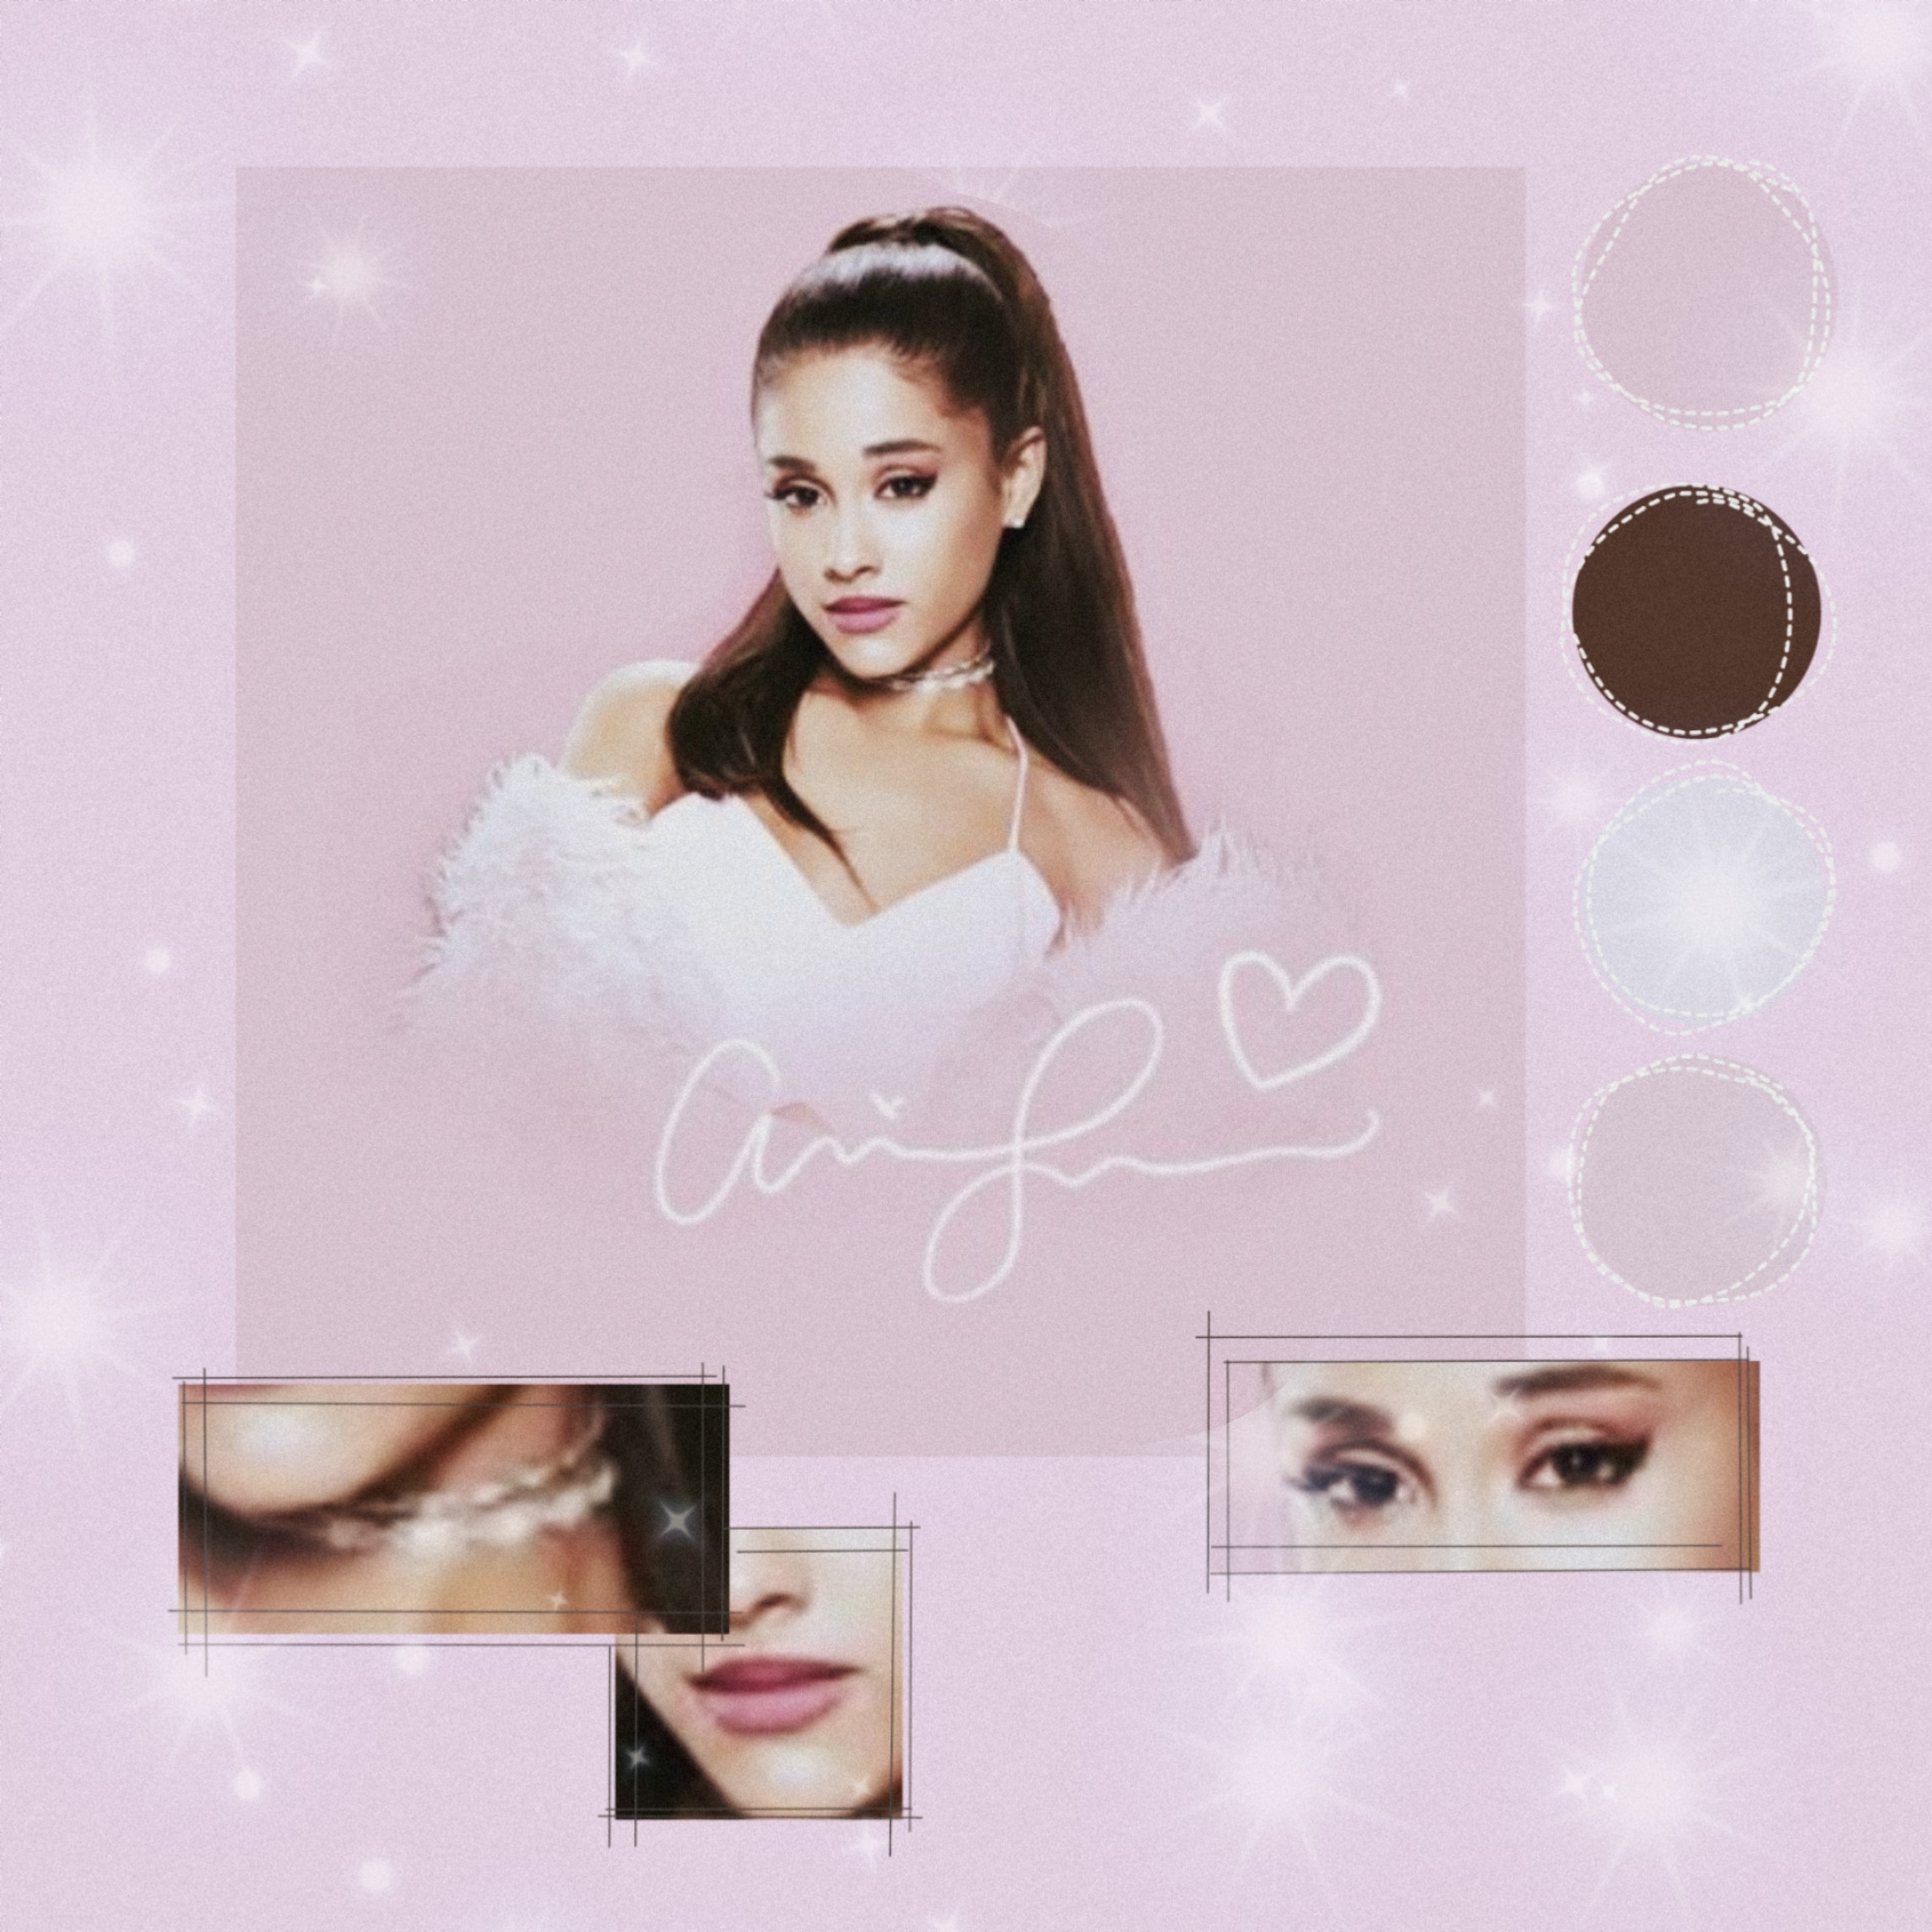 arianagrande cute pink aesthetic This is image by @jans24